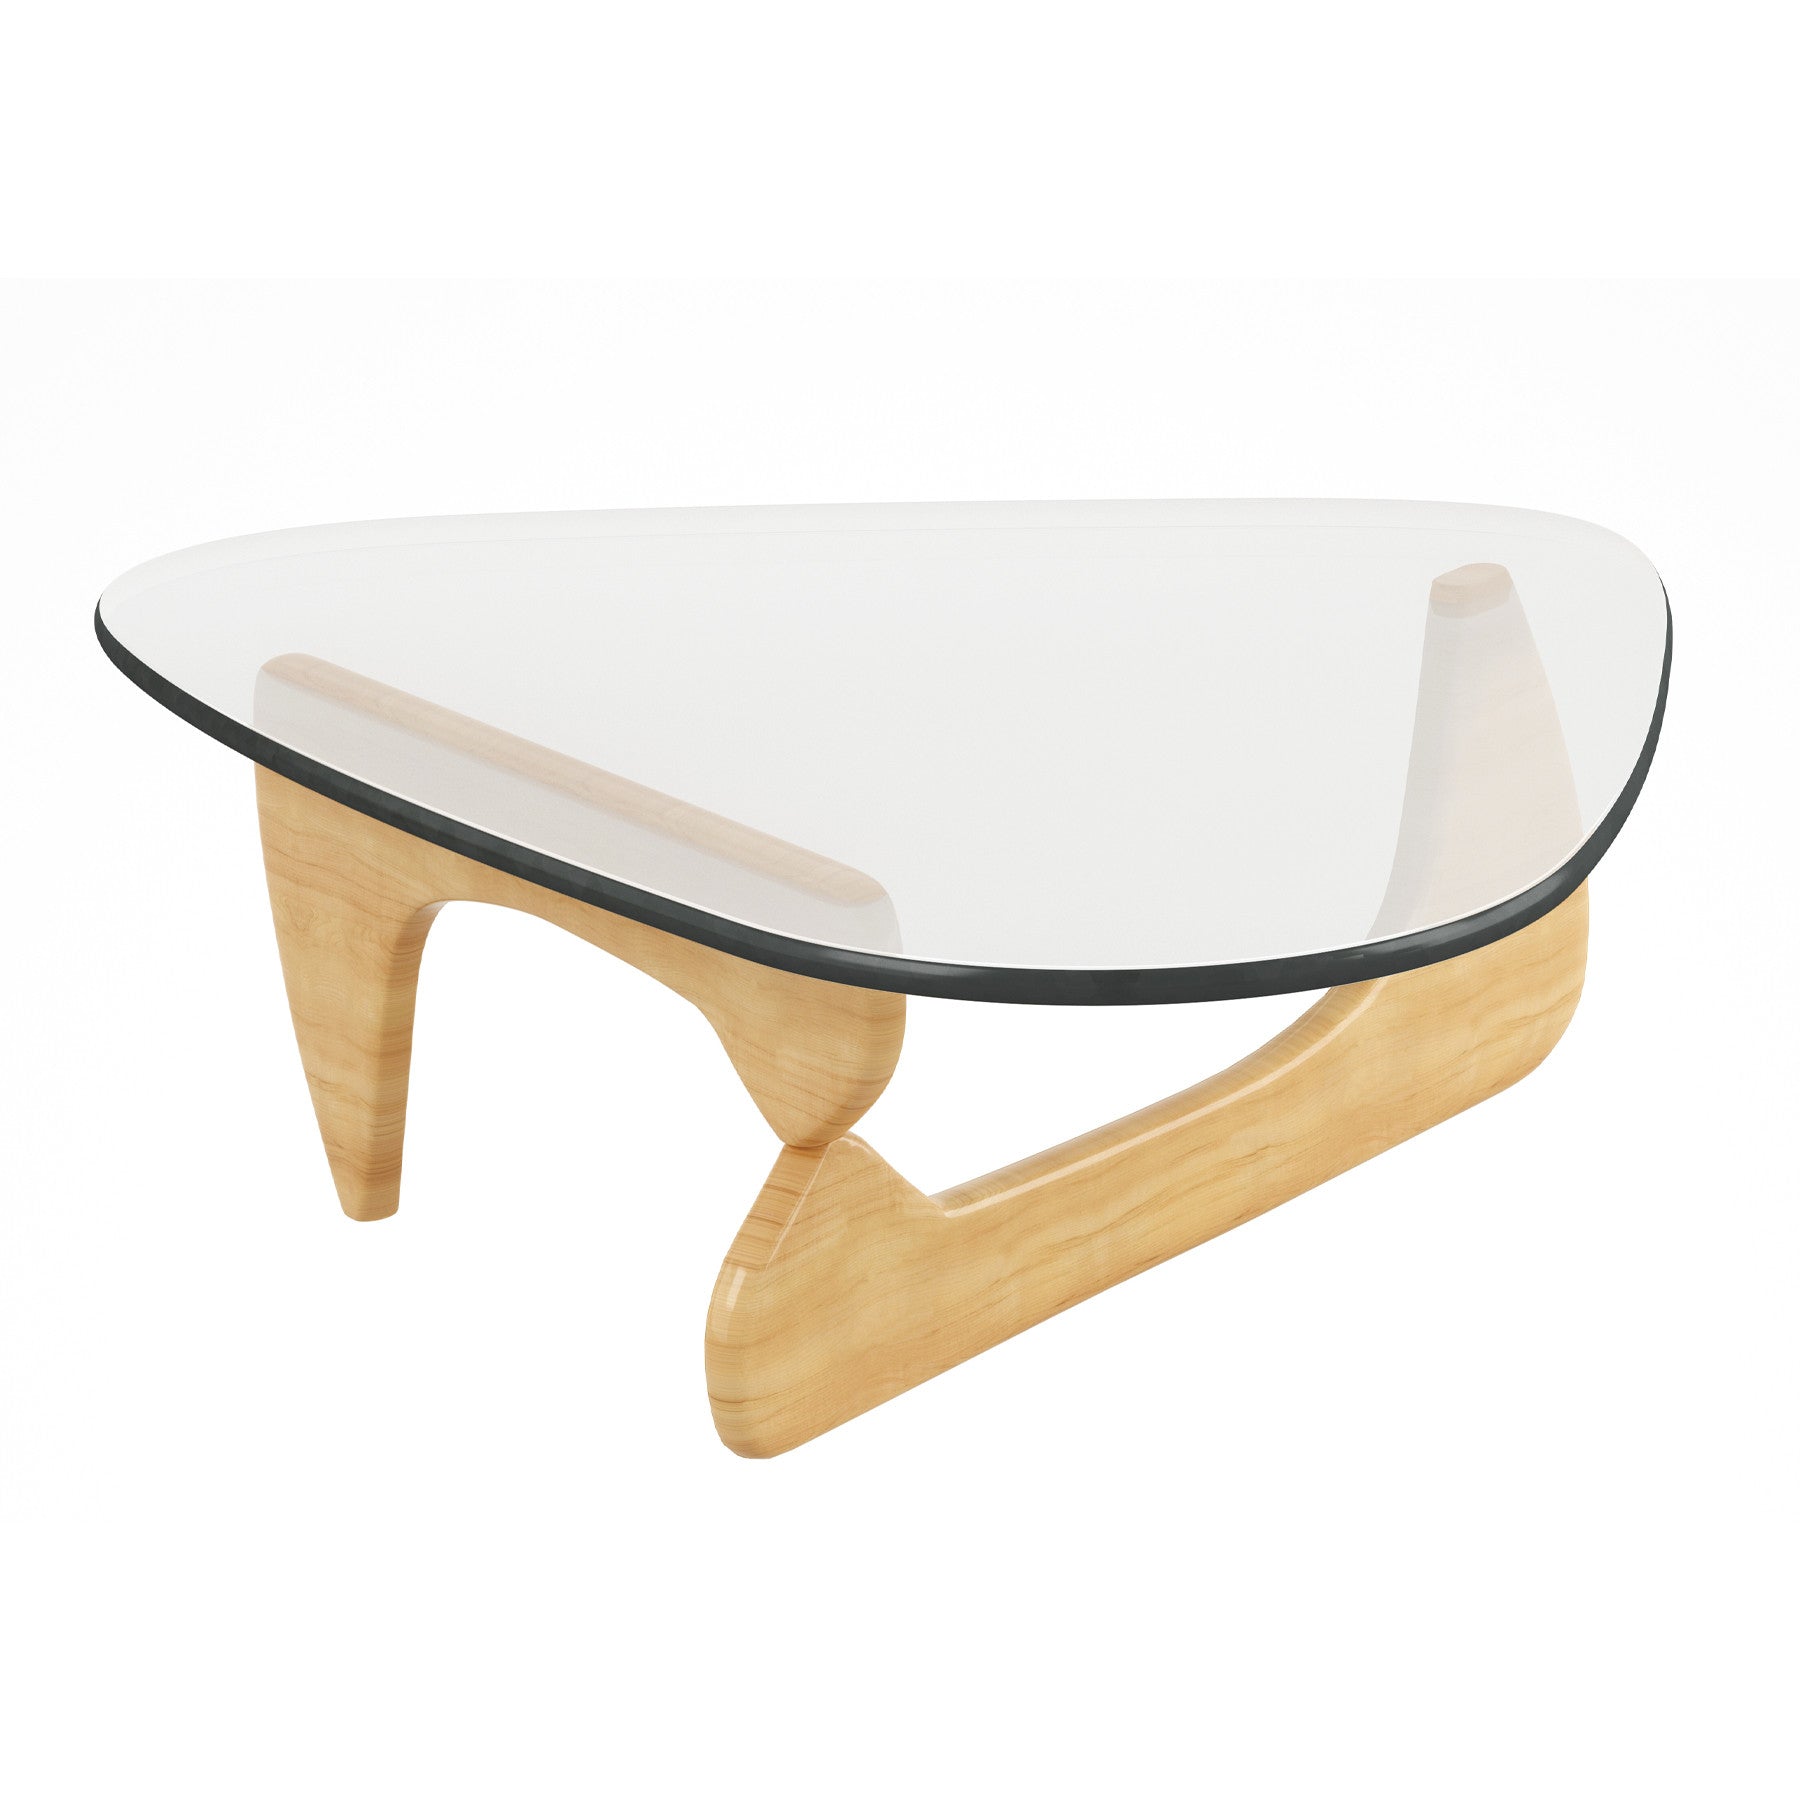 50" Clear And Natural Glass And Solid Wood Triangle Coffee Table